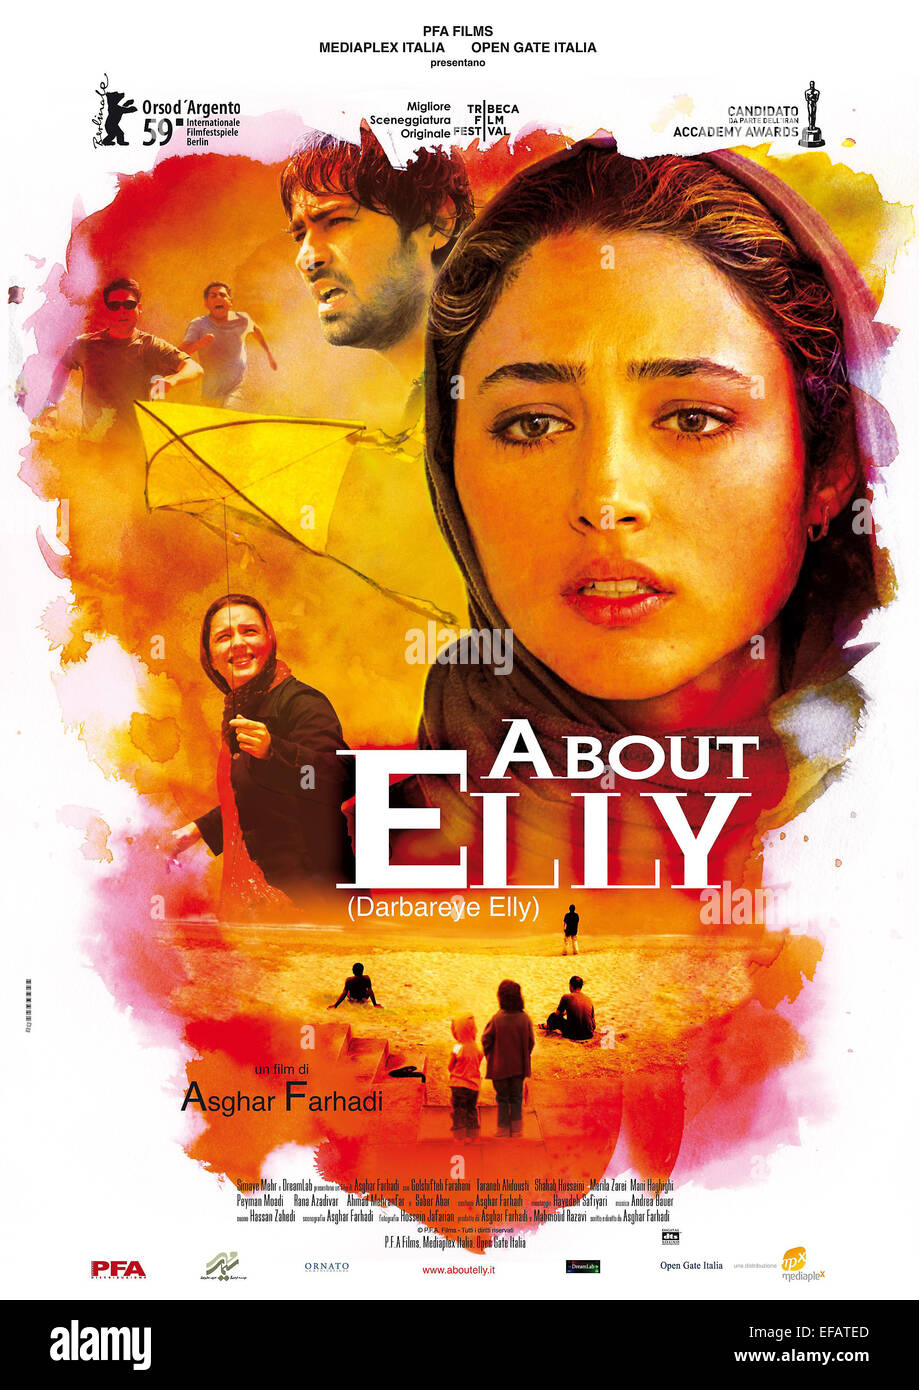 MOVIE POSTER DARBAREYE ELLY; ABOUT ELLY (2009 Stock Photo - Alamy